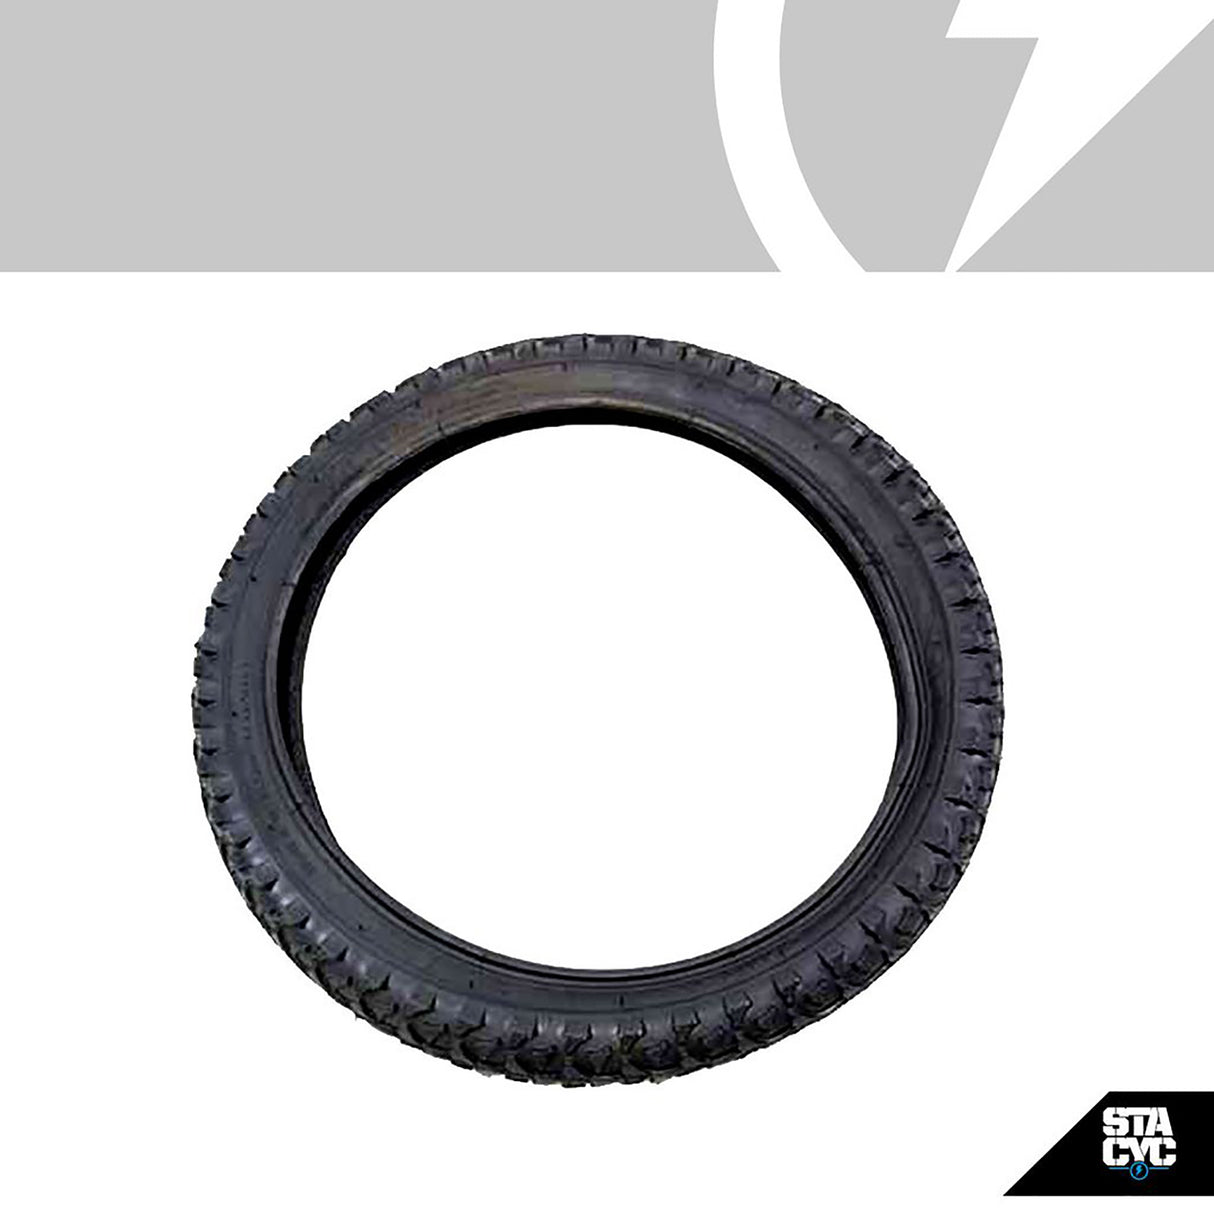 STACYC REPLACEMENT STOCK TIRE - 16 EDRIVE